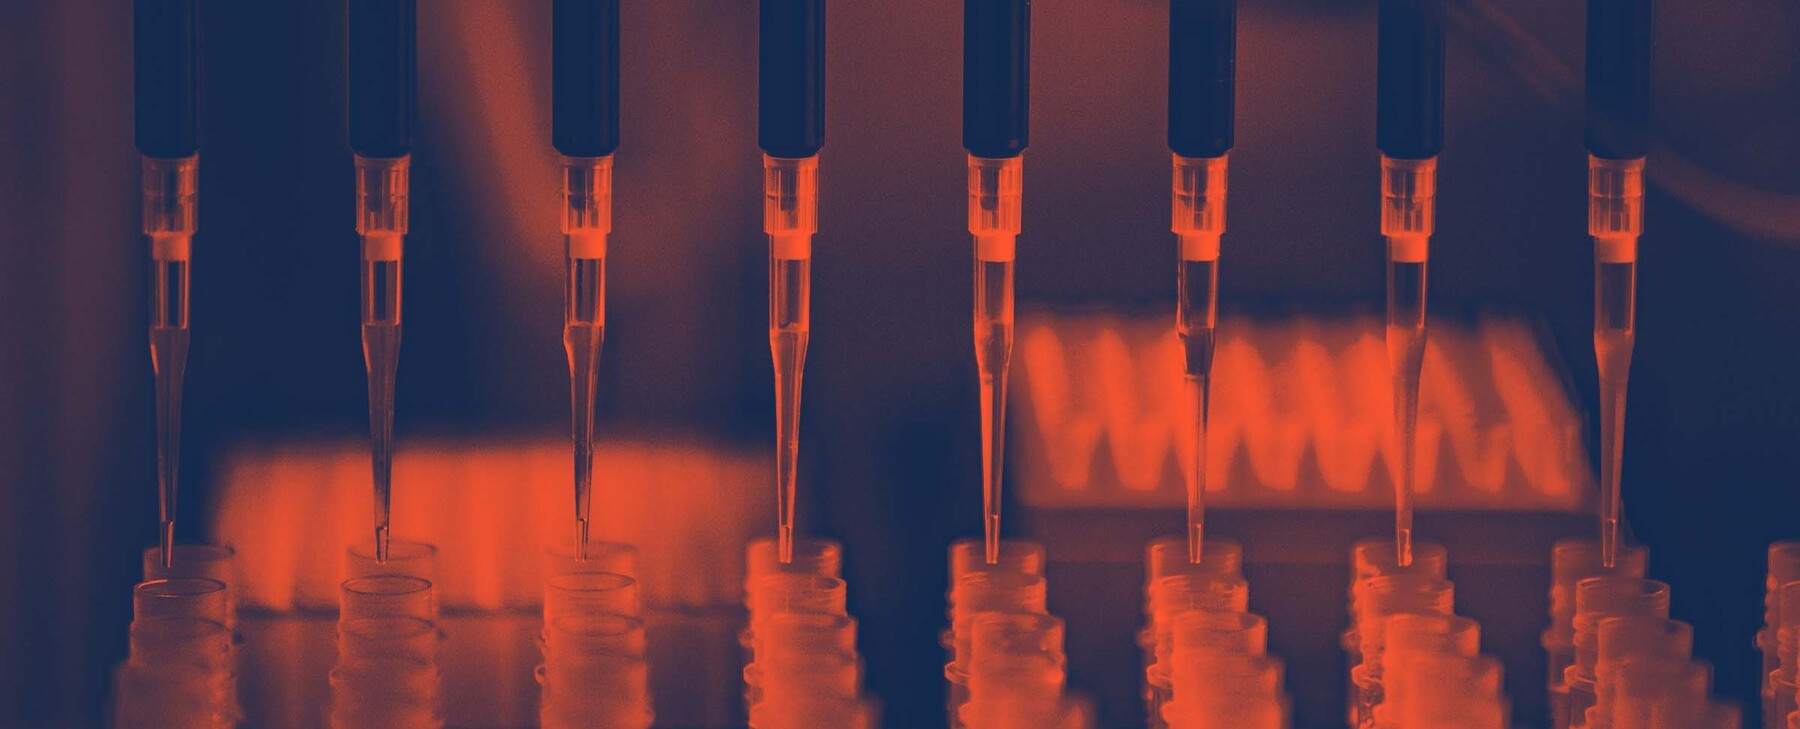 test tubes with an orange and blue filter overtop it